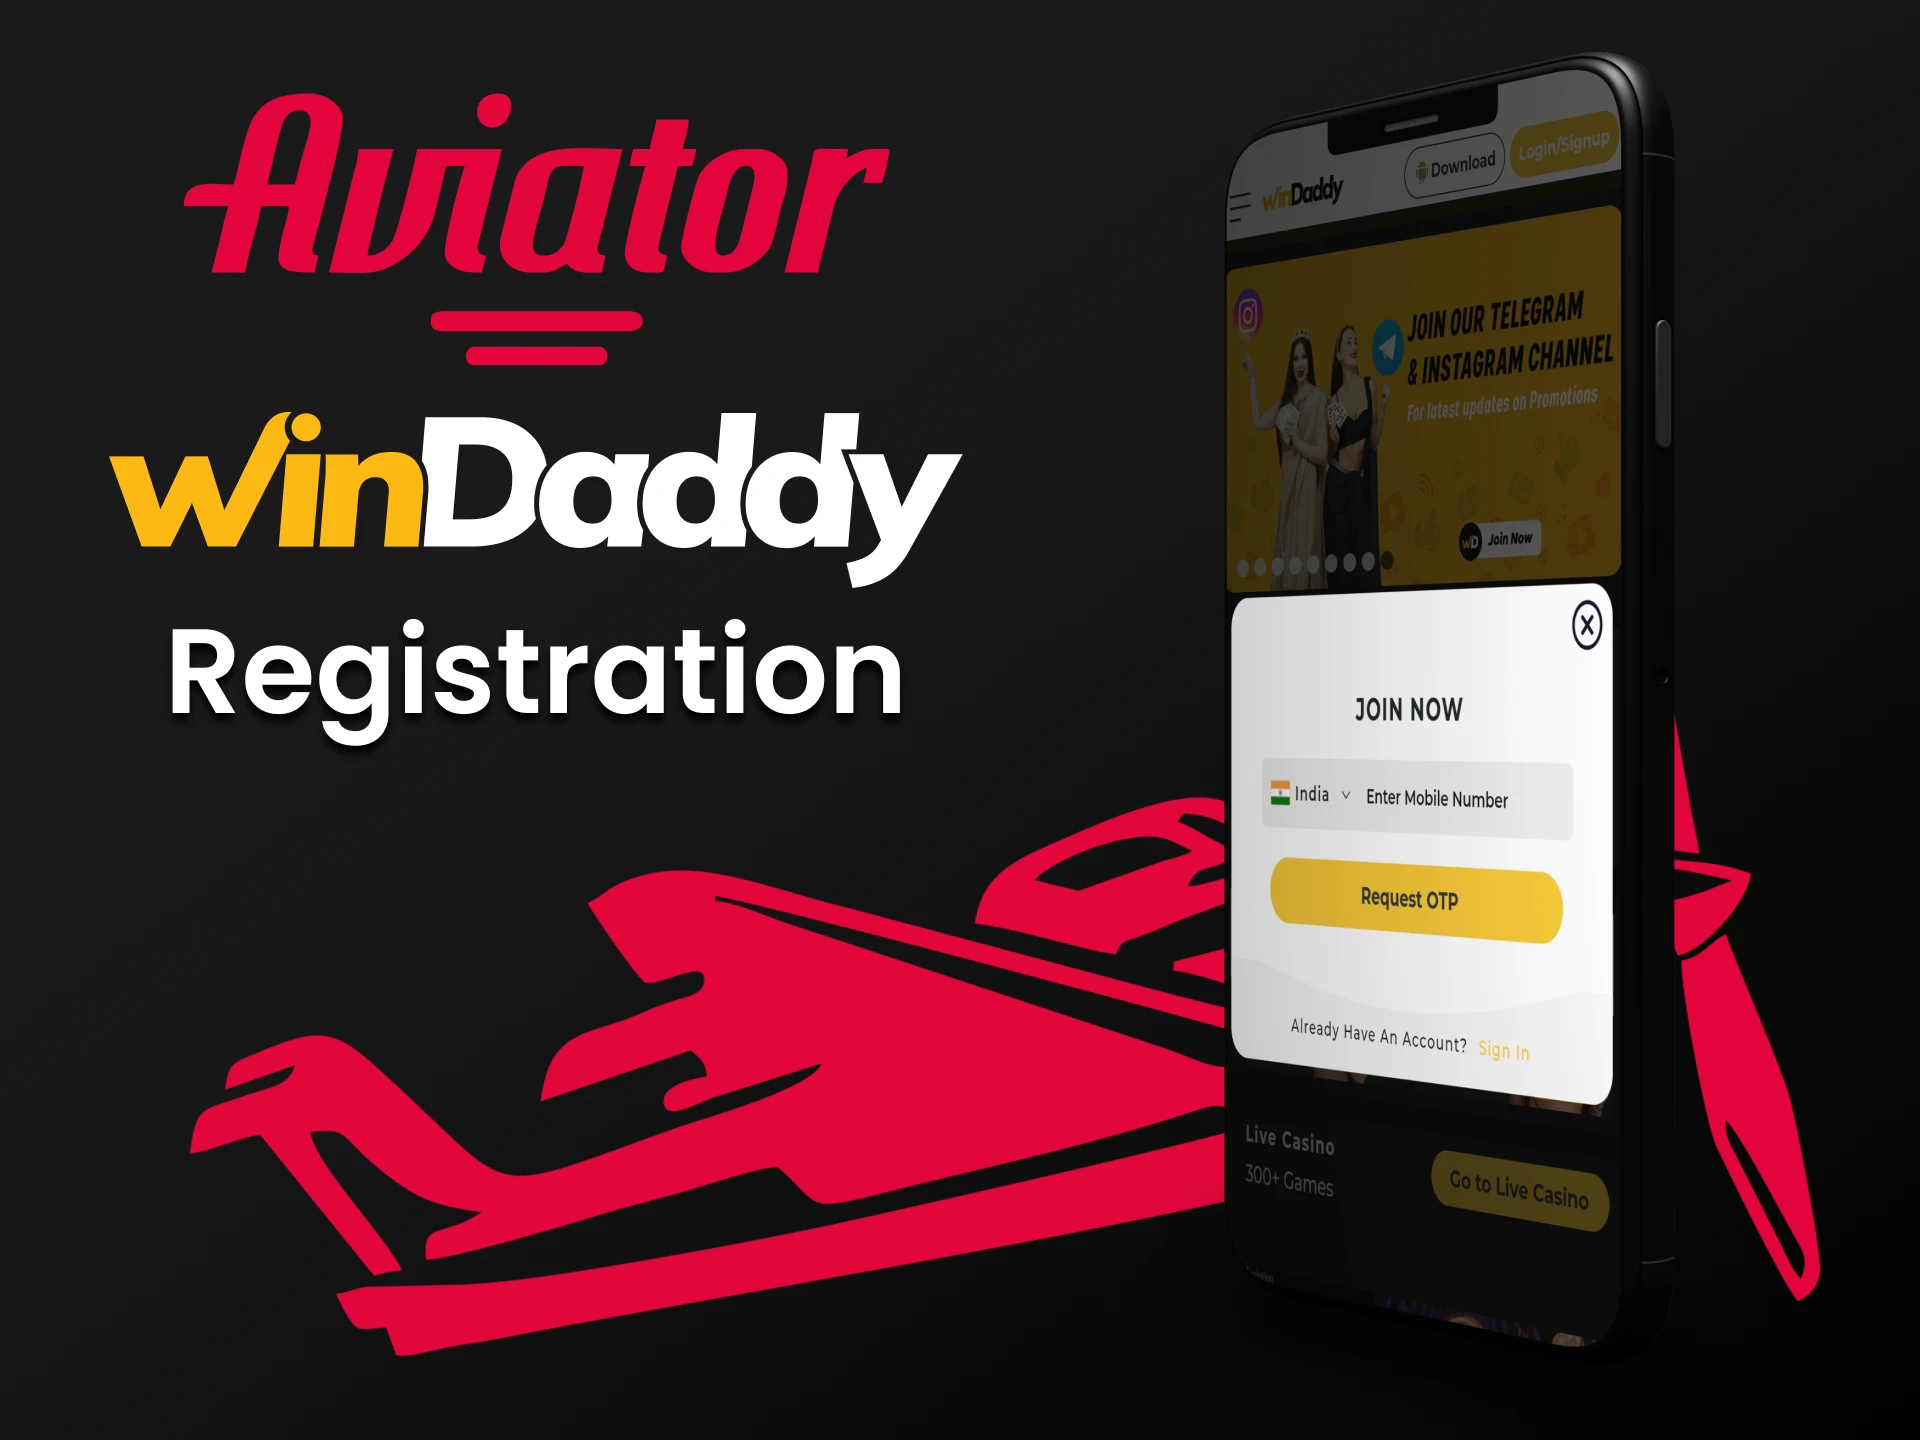 Register in the WinDaddy app to play Aviator.